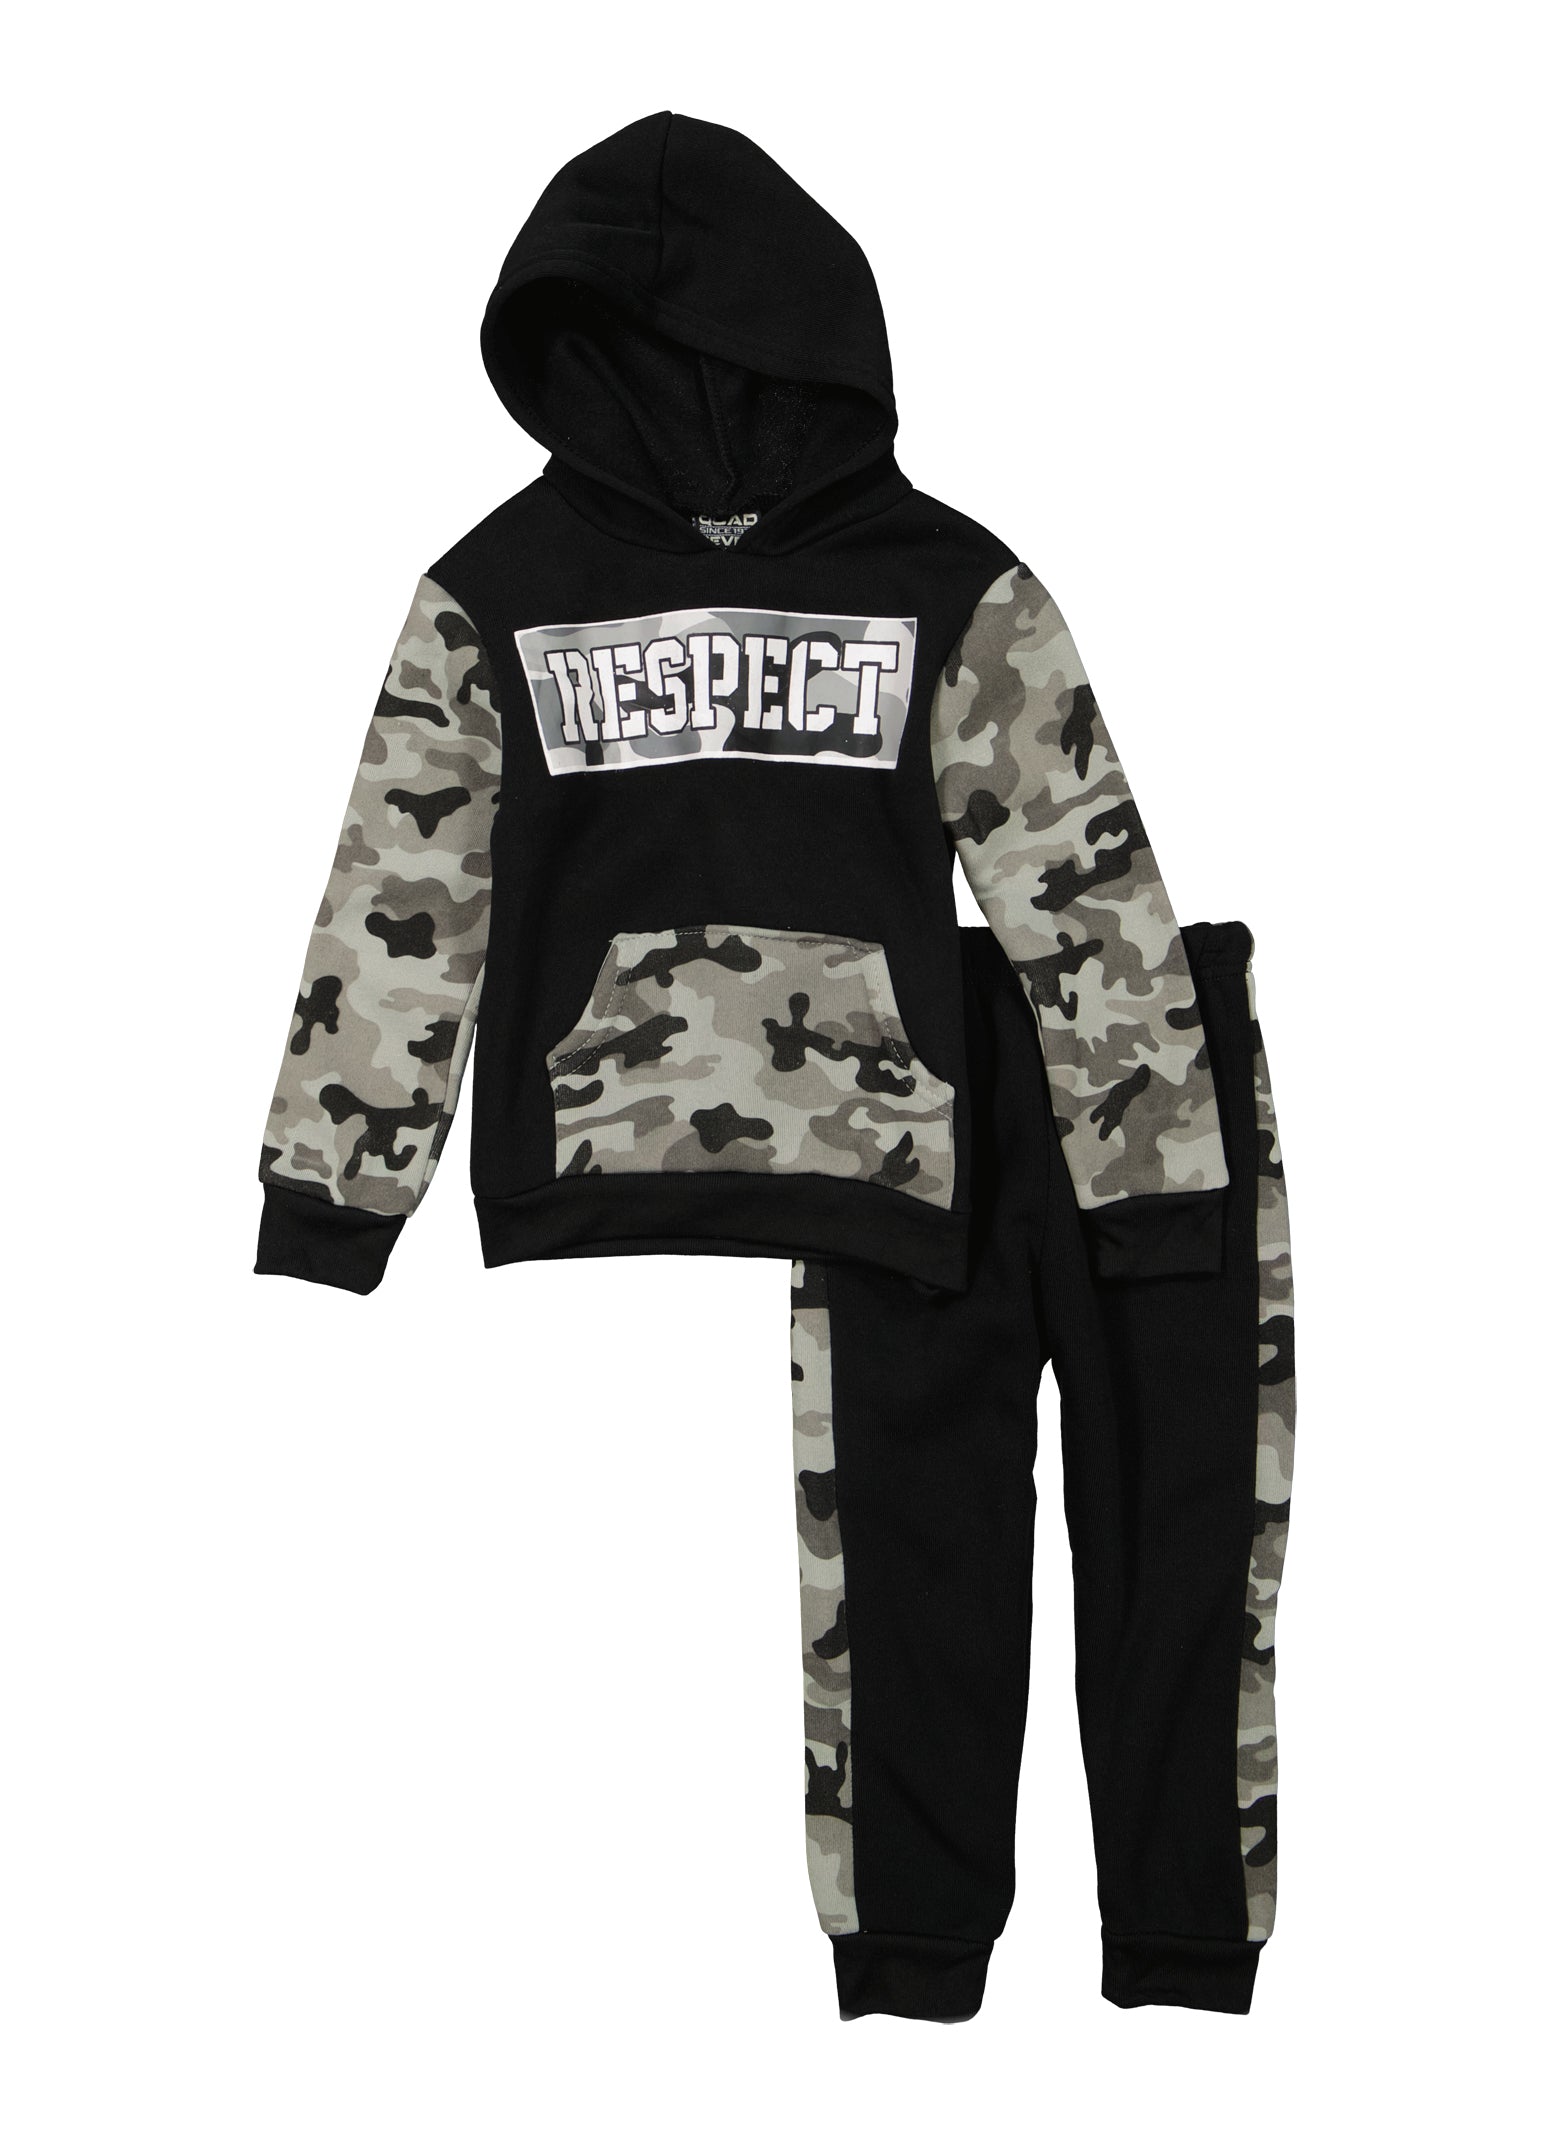 Toddler Boys Respect Camo Hoodie and Joggers